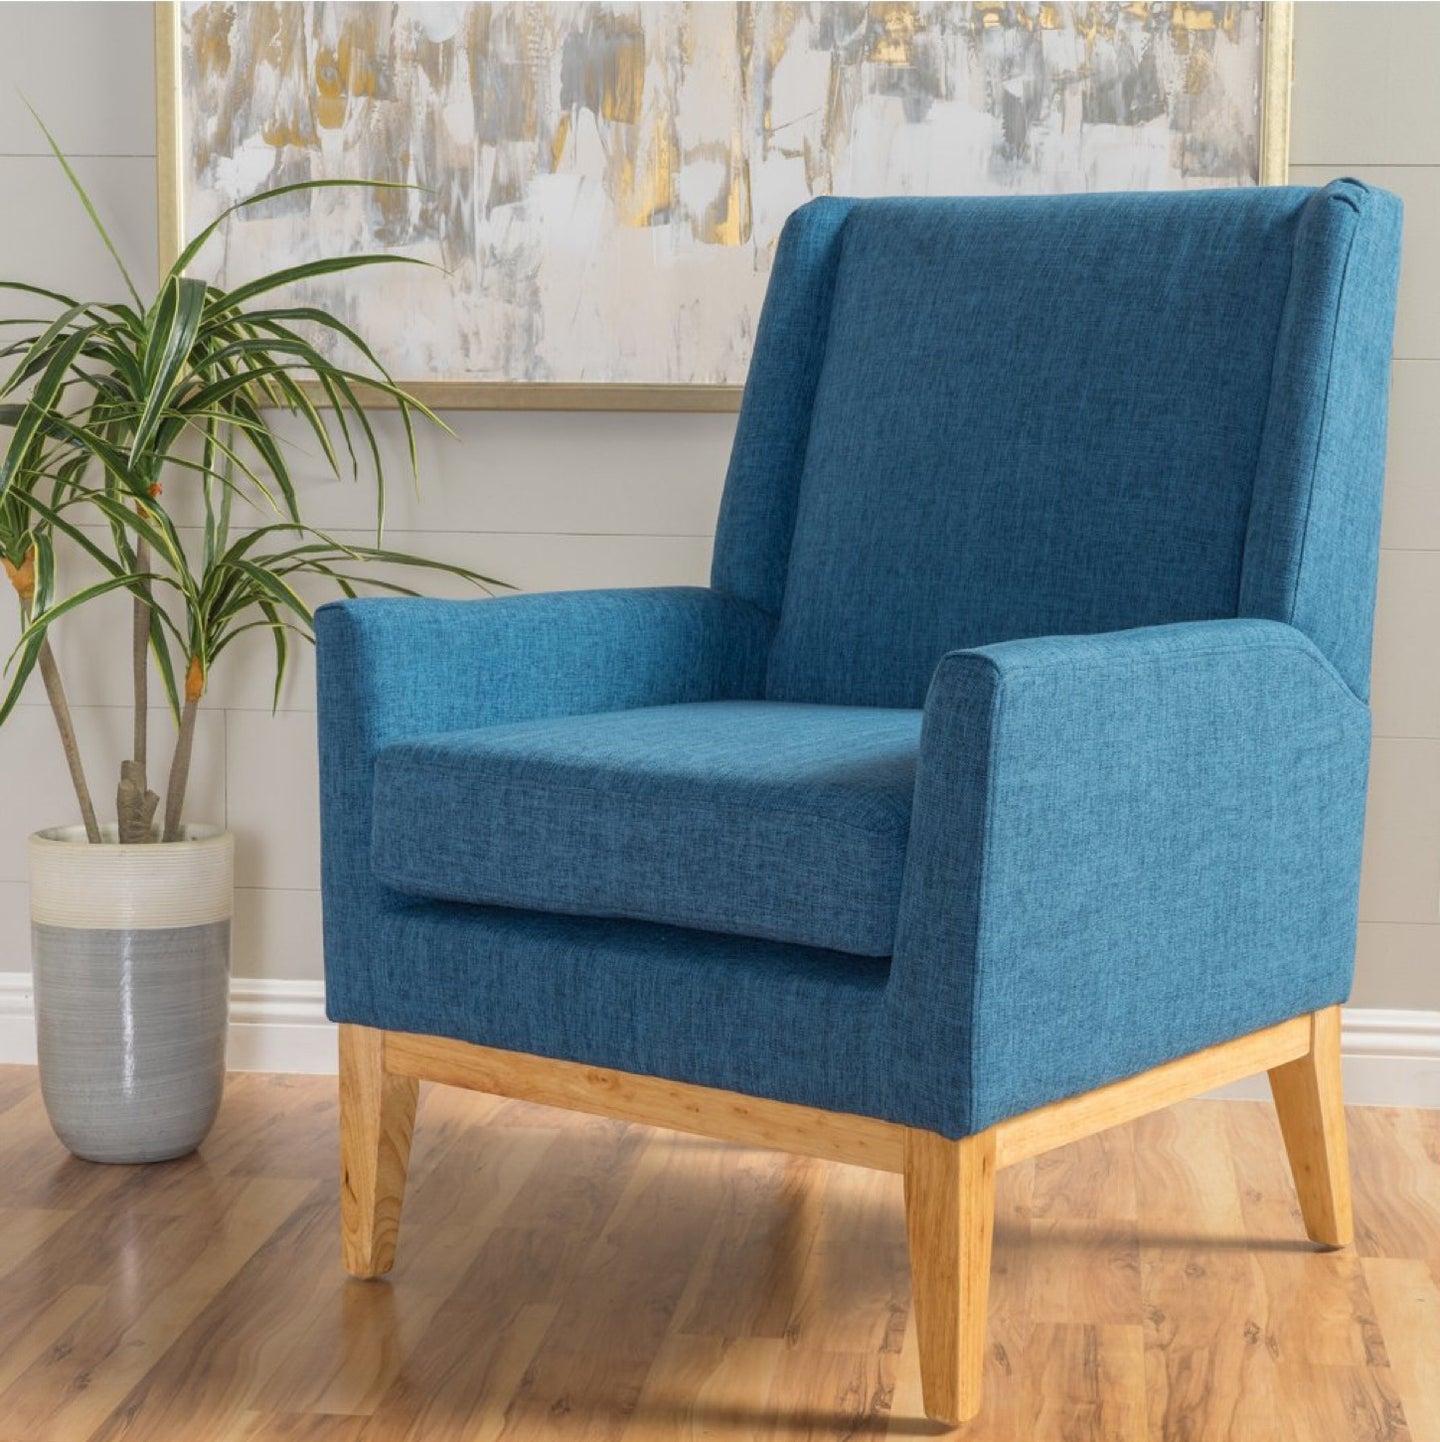 Aurla Upholstered Chair - Christopher Knight Home #4150